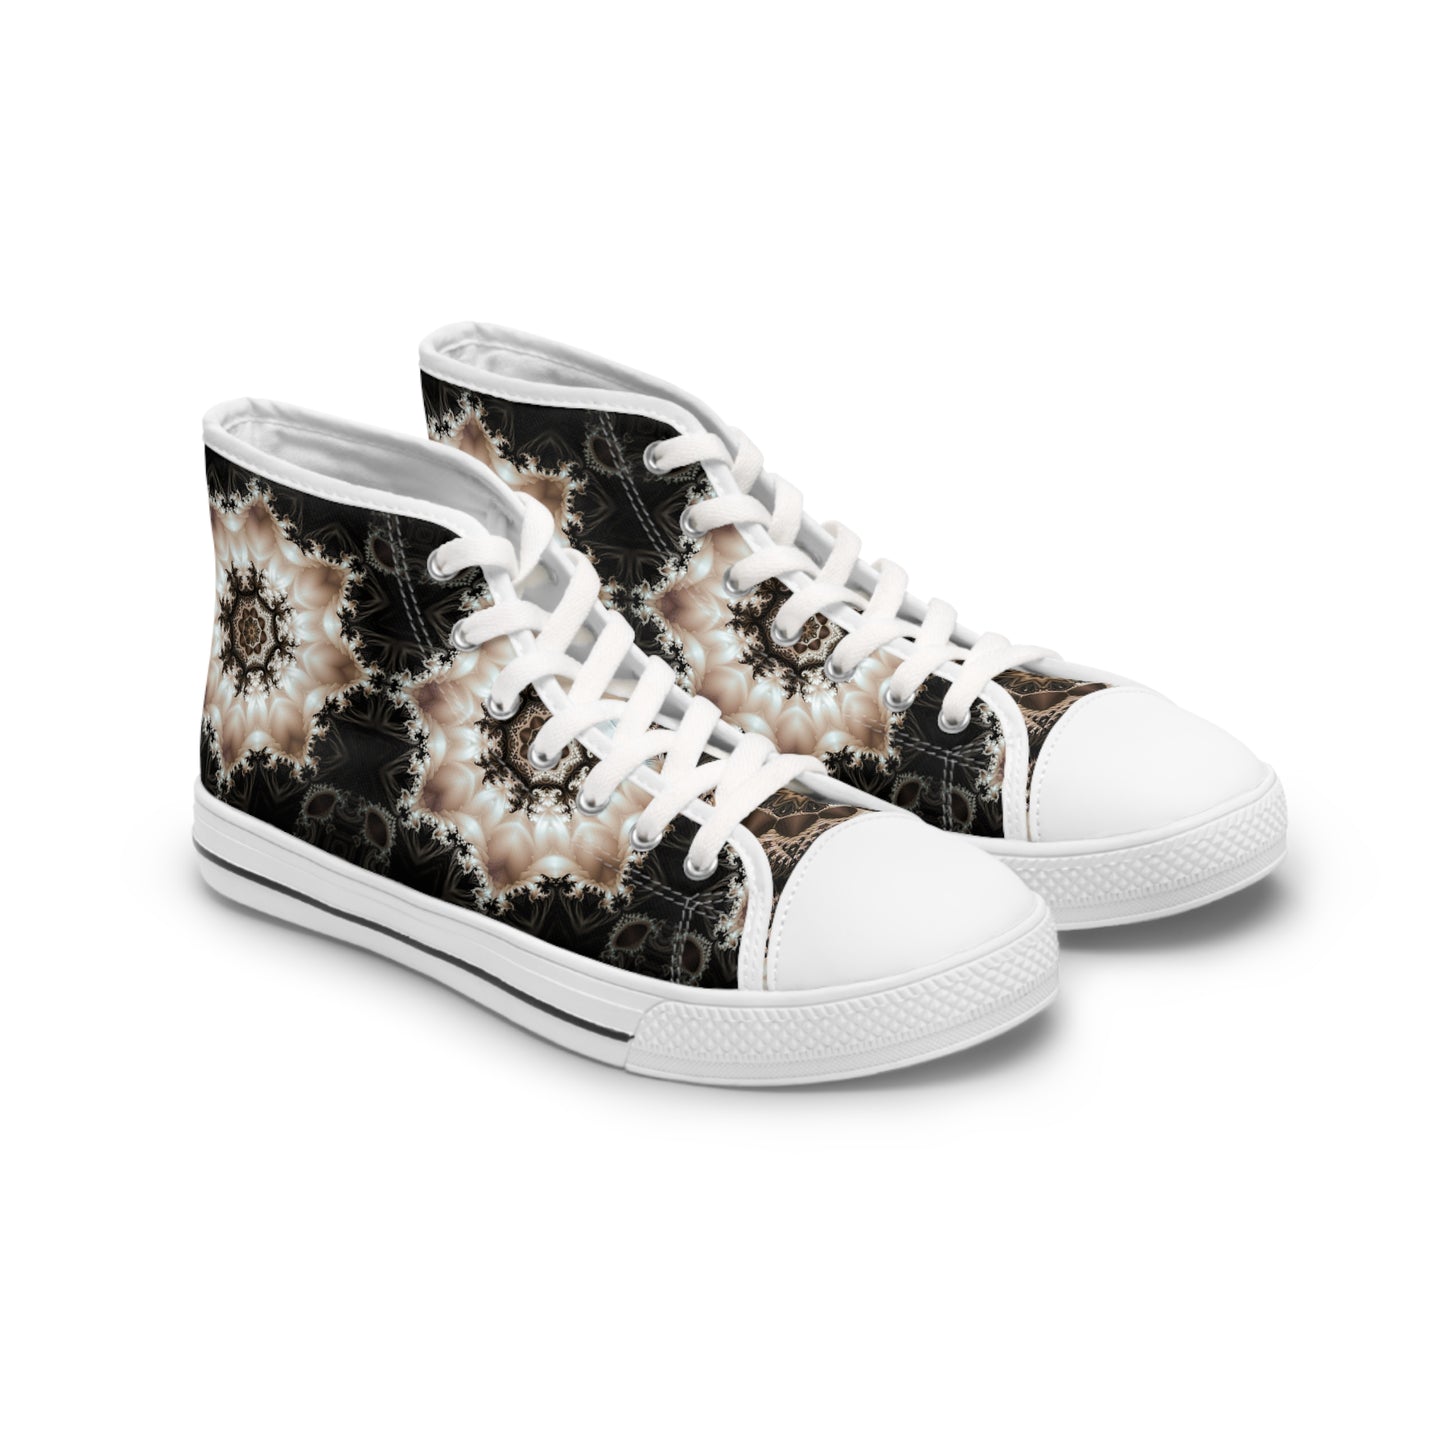 "Duality V2" WOMEN'S HIGH TOP SNEAKERS